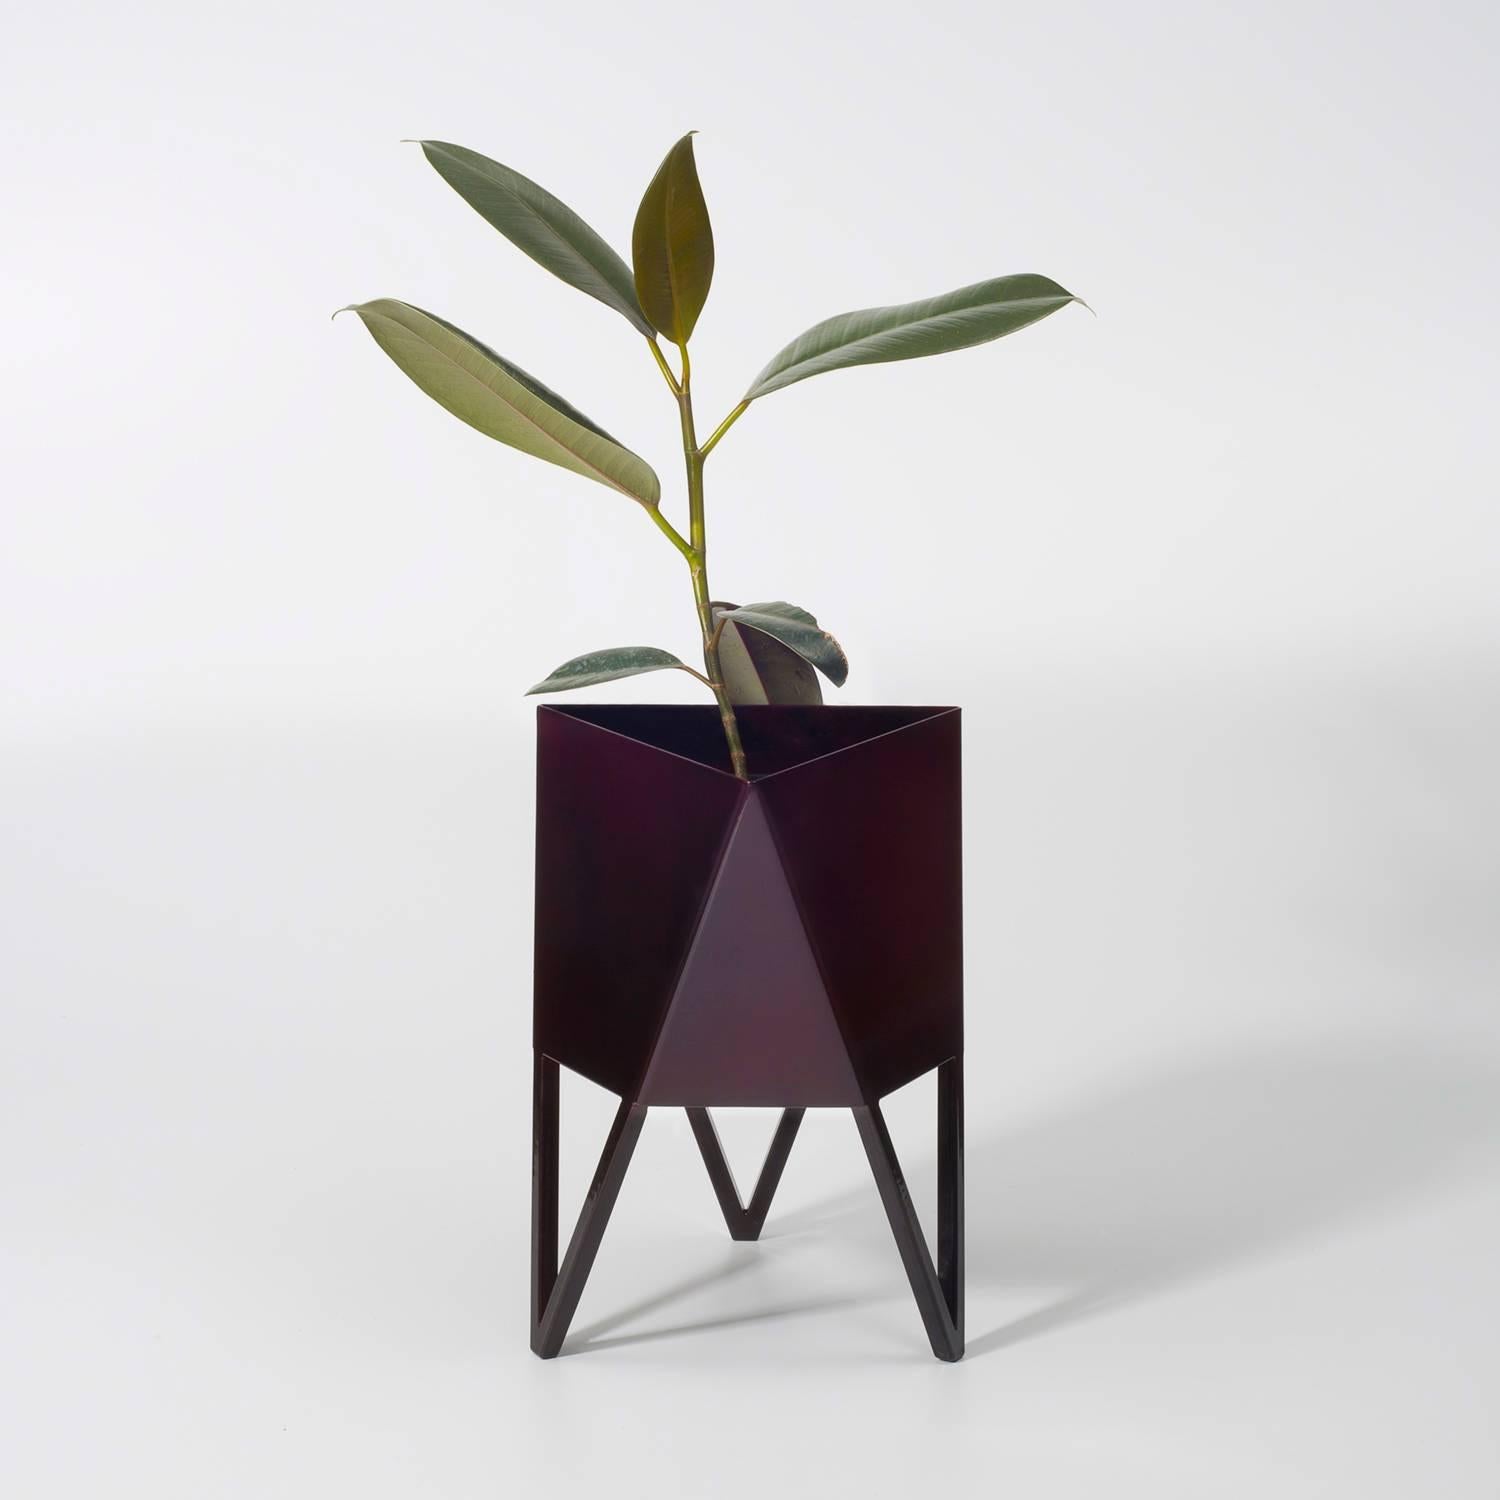 Deca Planter in Light Pink Steel, Medium, by Force/Collide 1